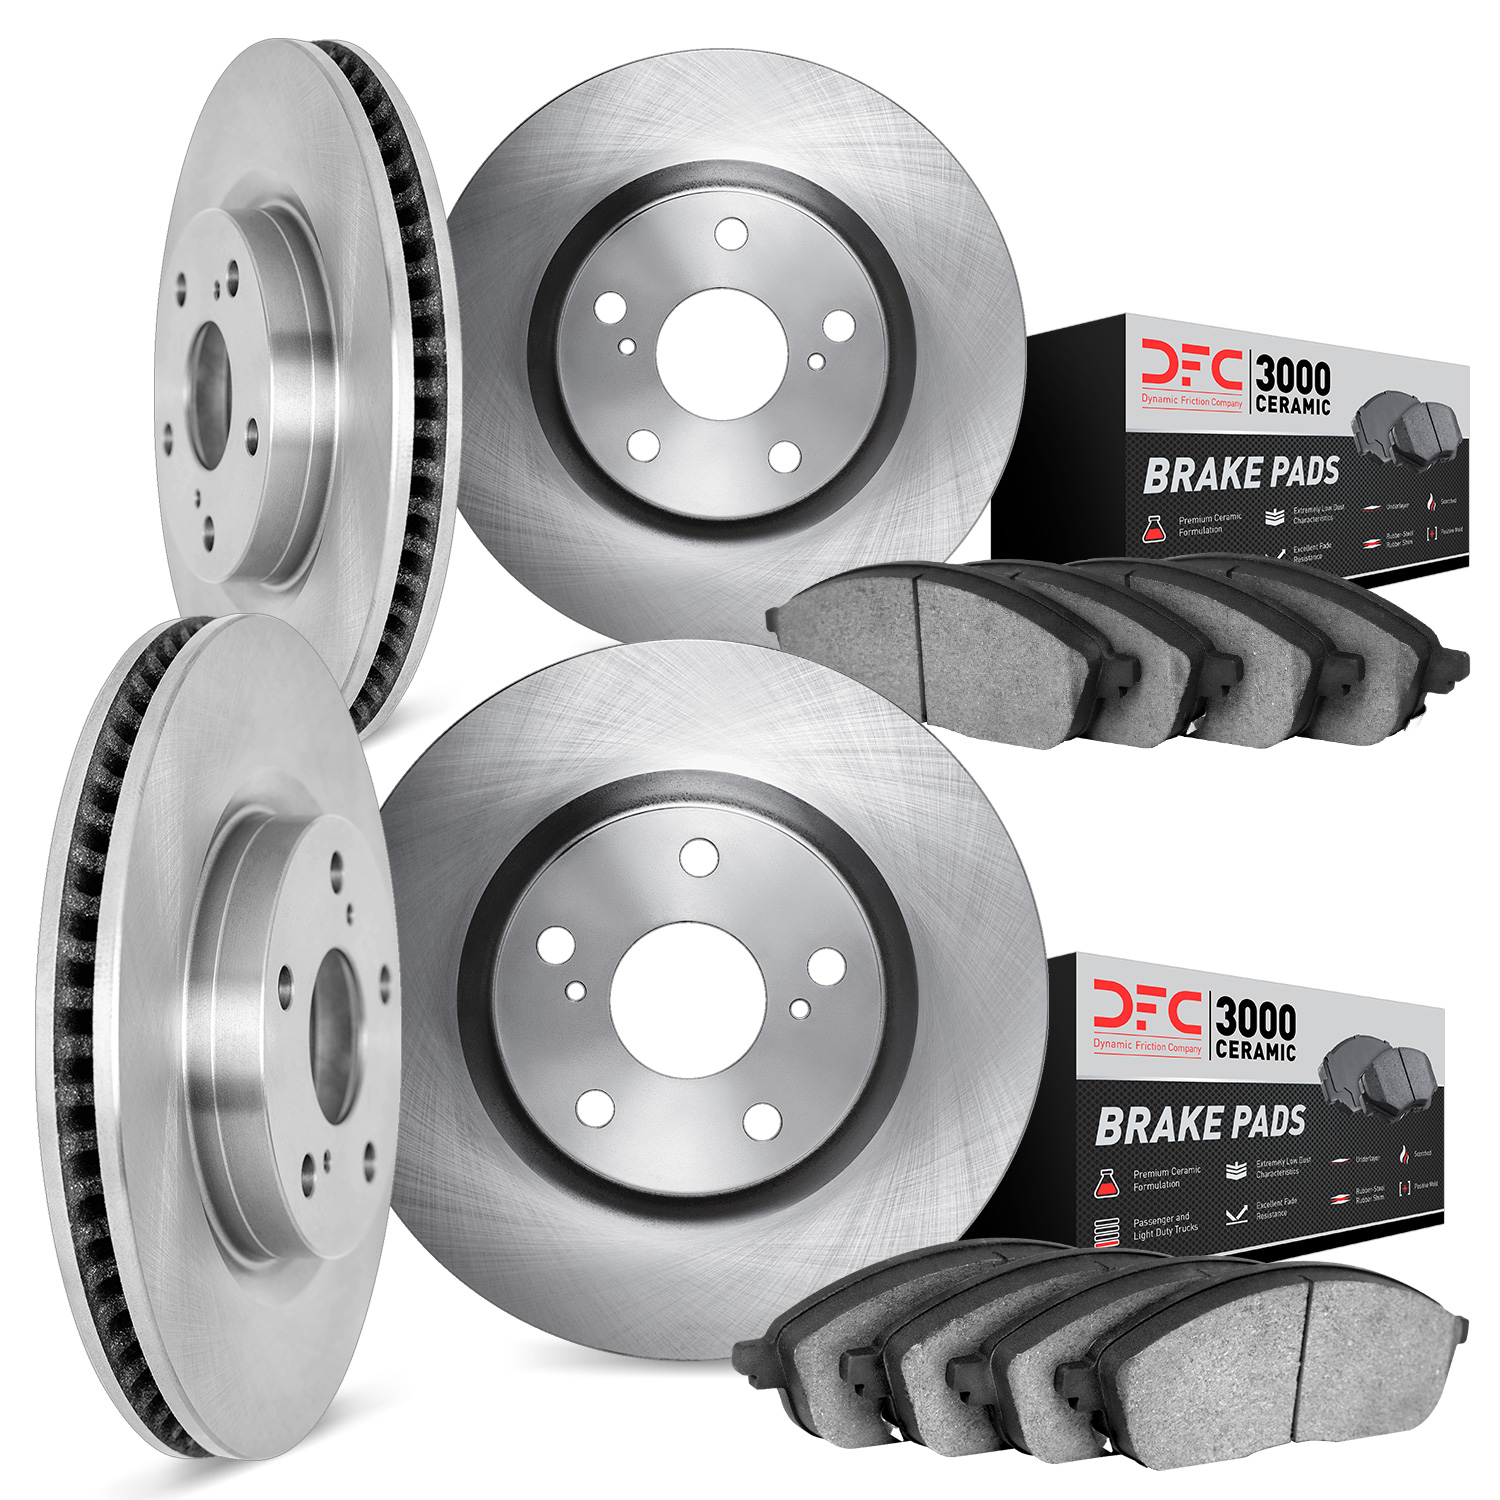 6304-31027 Brake Rotors with 3000-Series Ceramic Brake Pads Kit, 1996-2005 BMW, Position: Front and Rear